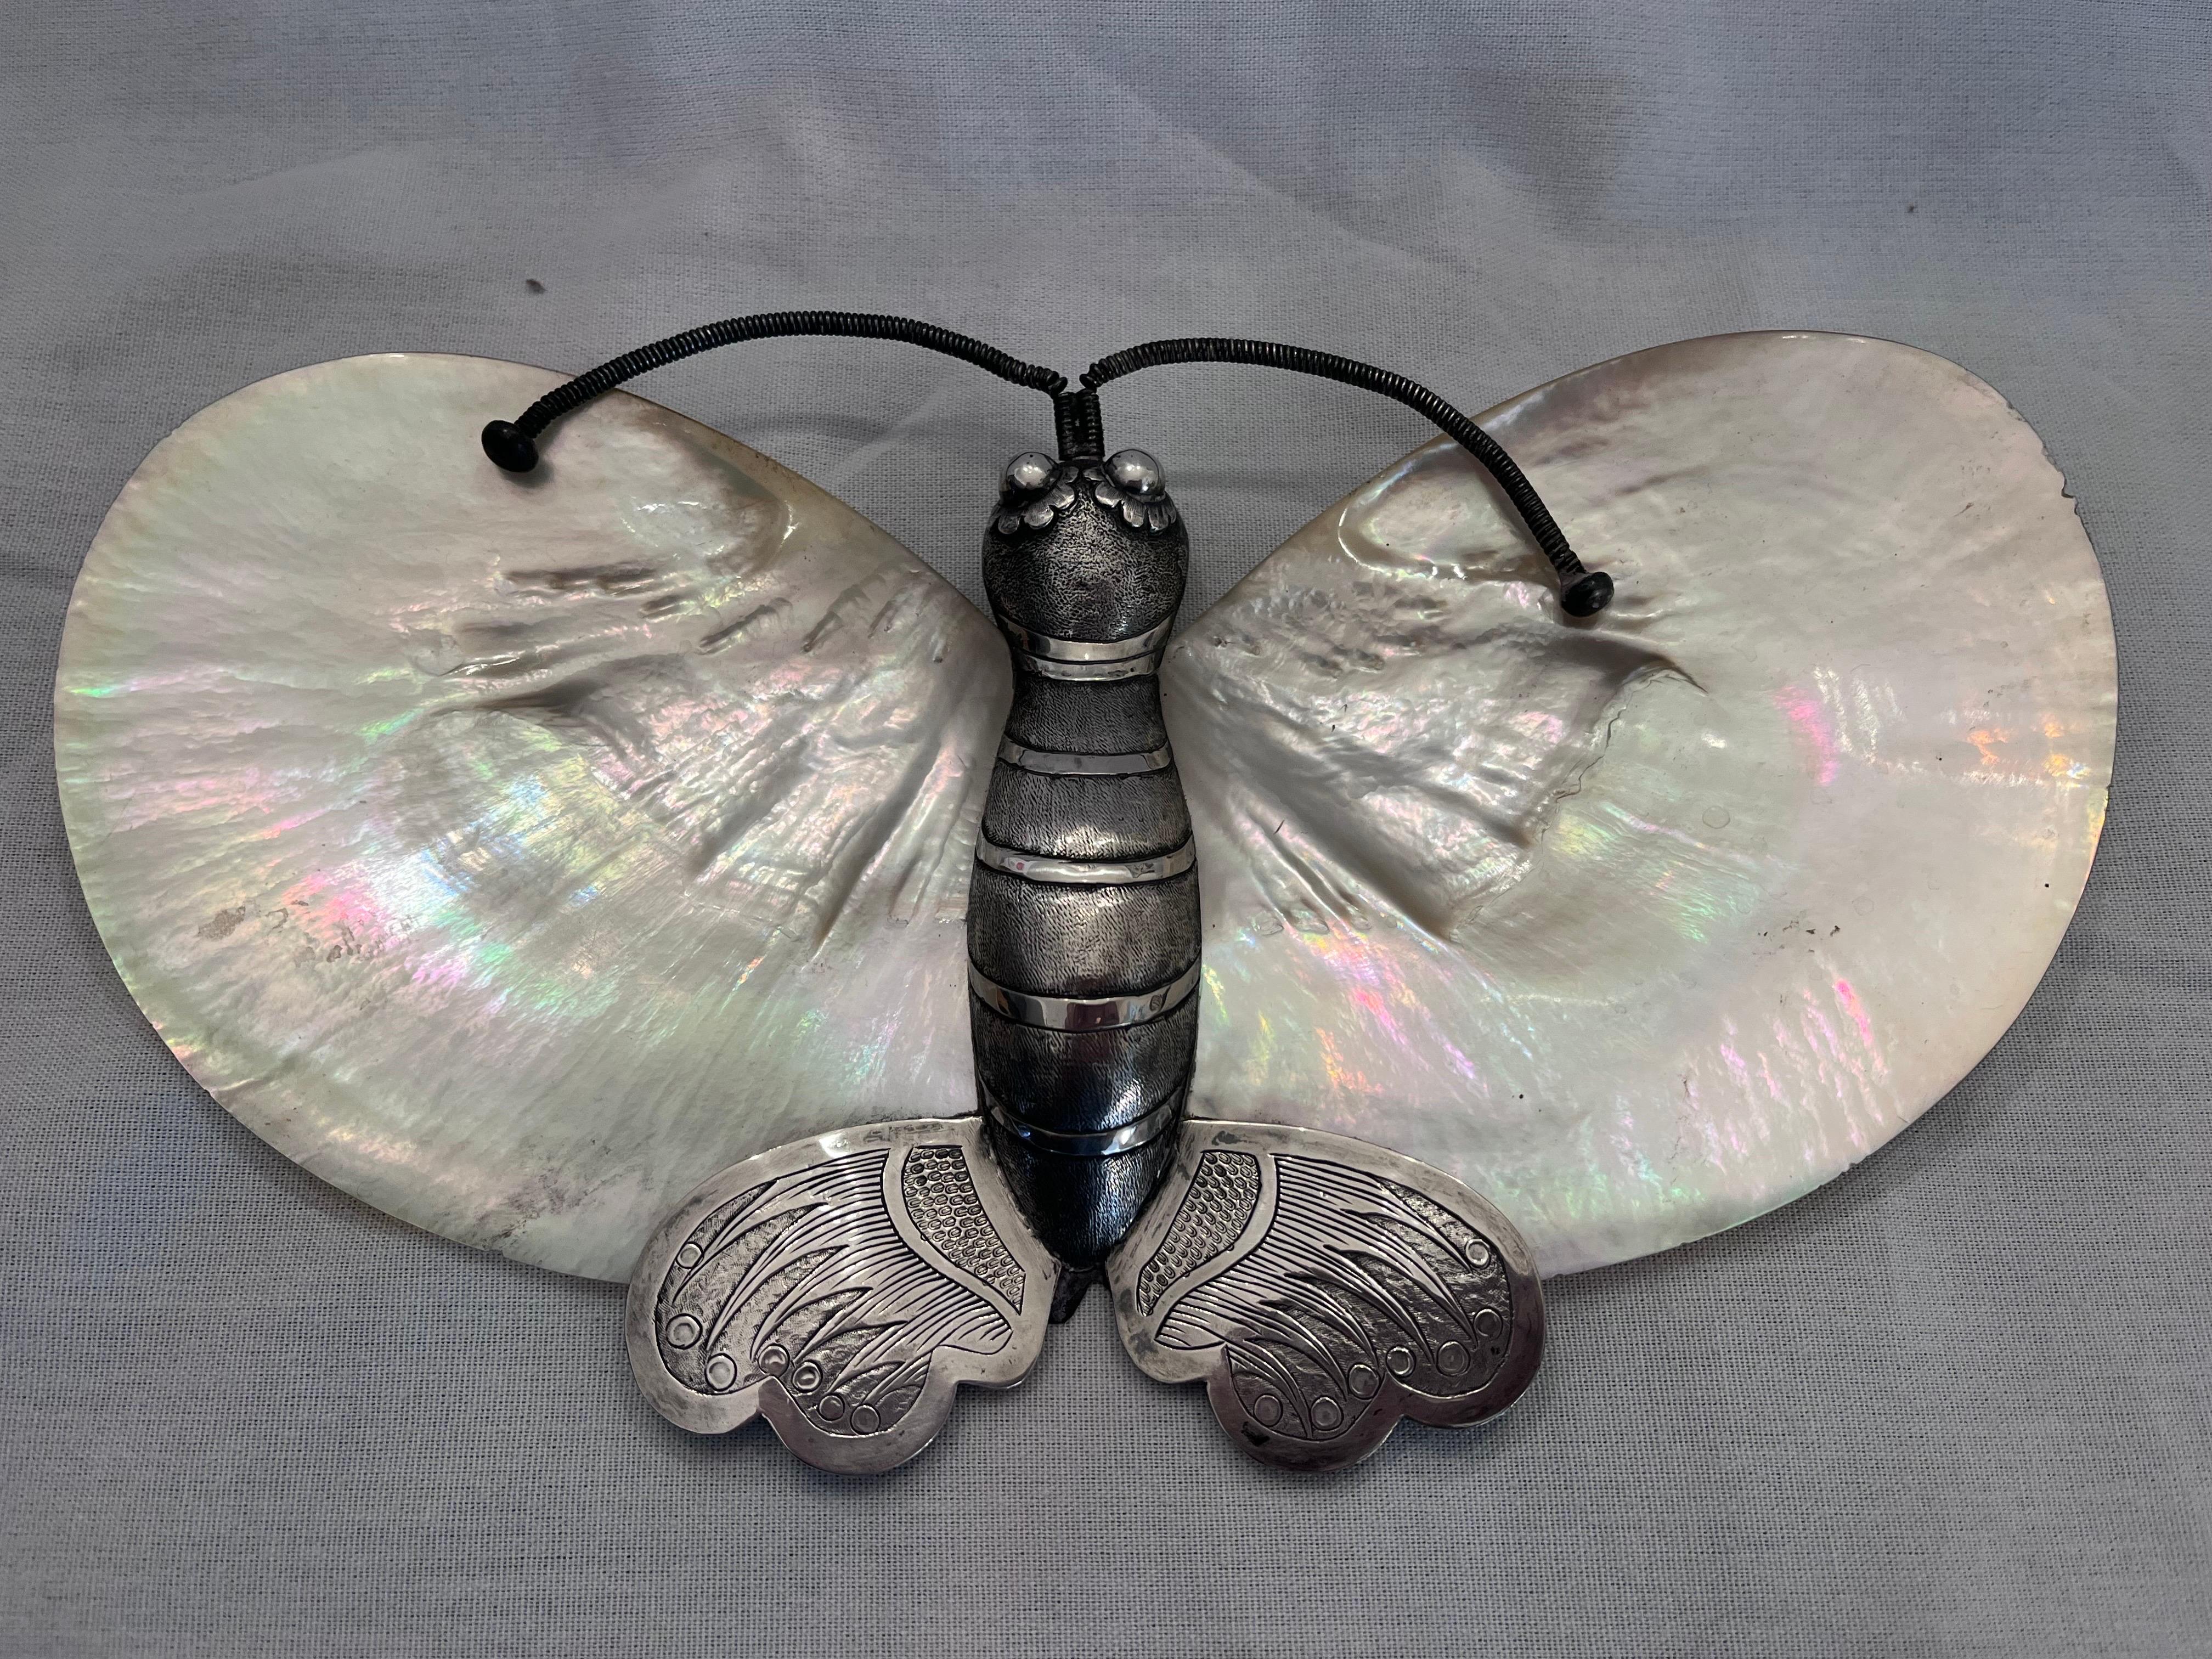 An antique silver and pinctada shell Chinese sweetmeat or caviar serving dish in the style of Kwan Wo. The double pinctada (a pearl oyster species) shell wings are gently formed with a delicate, rounded wing. The body is silver with incised and